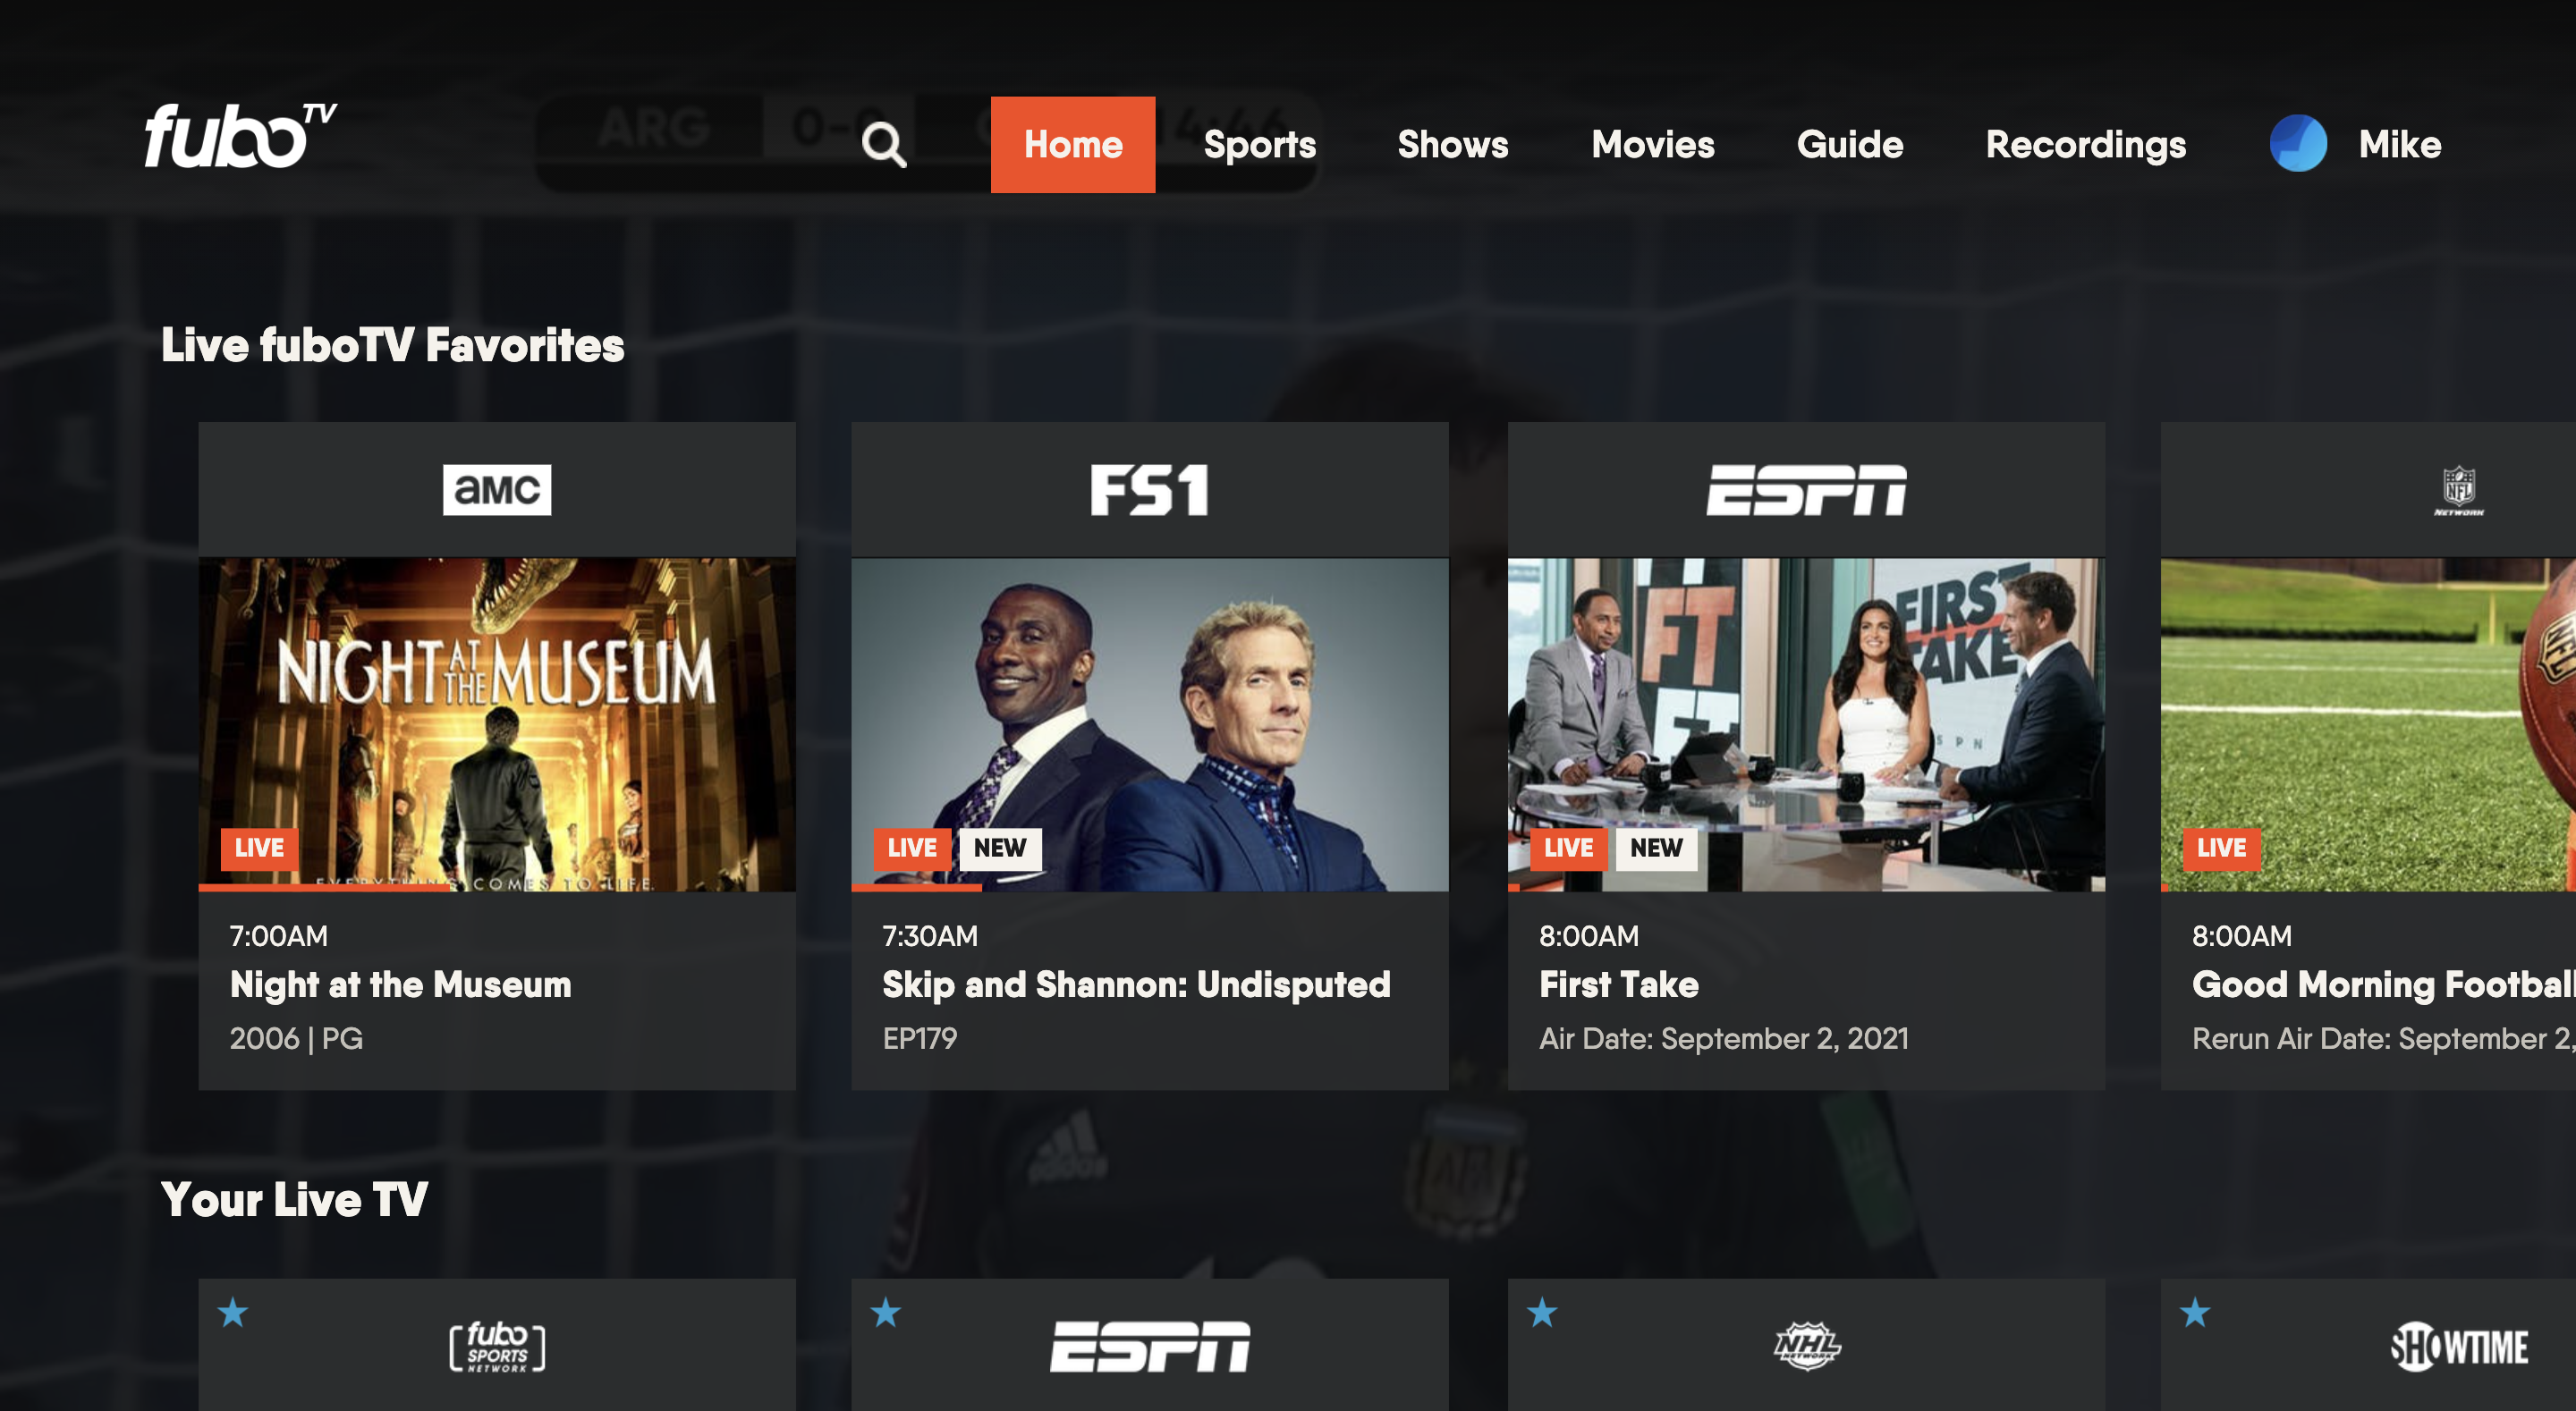 Home screen of the FuboTV app on a Samsung TV